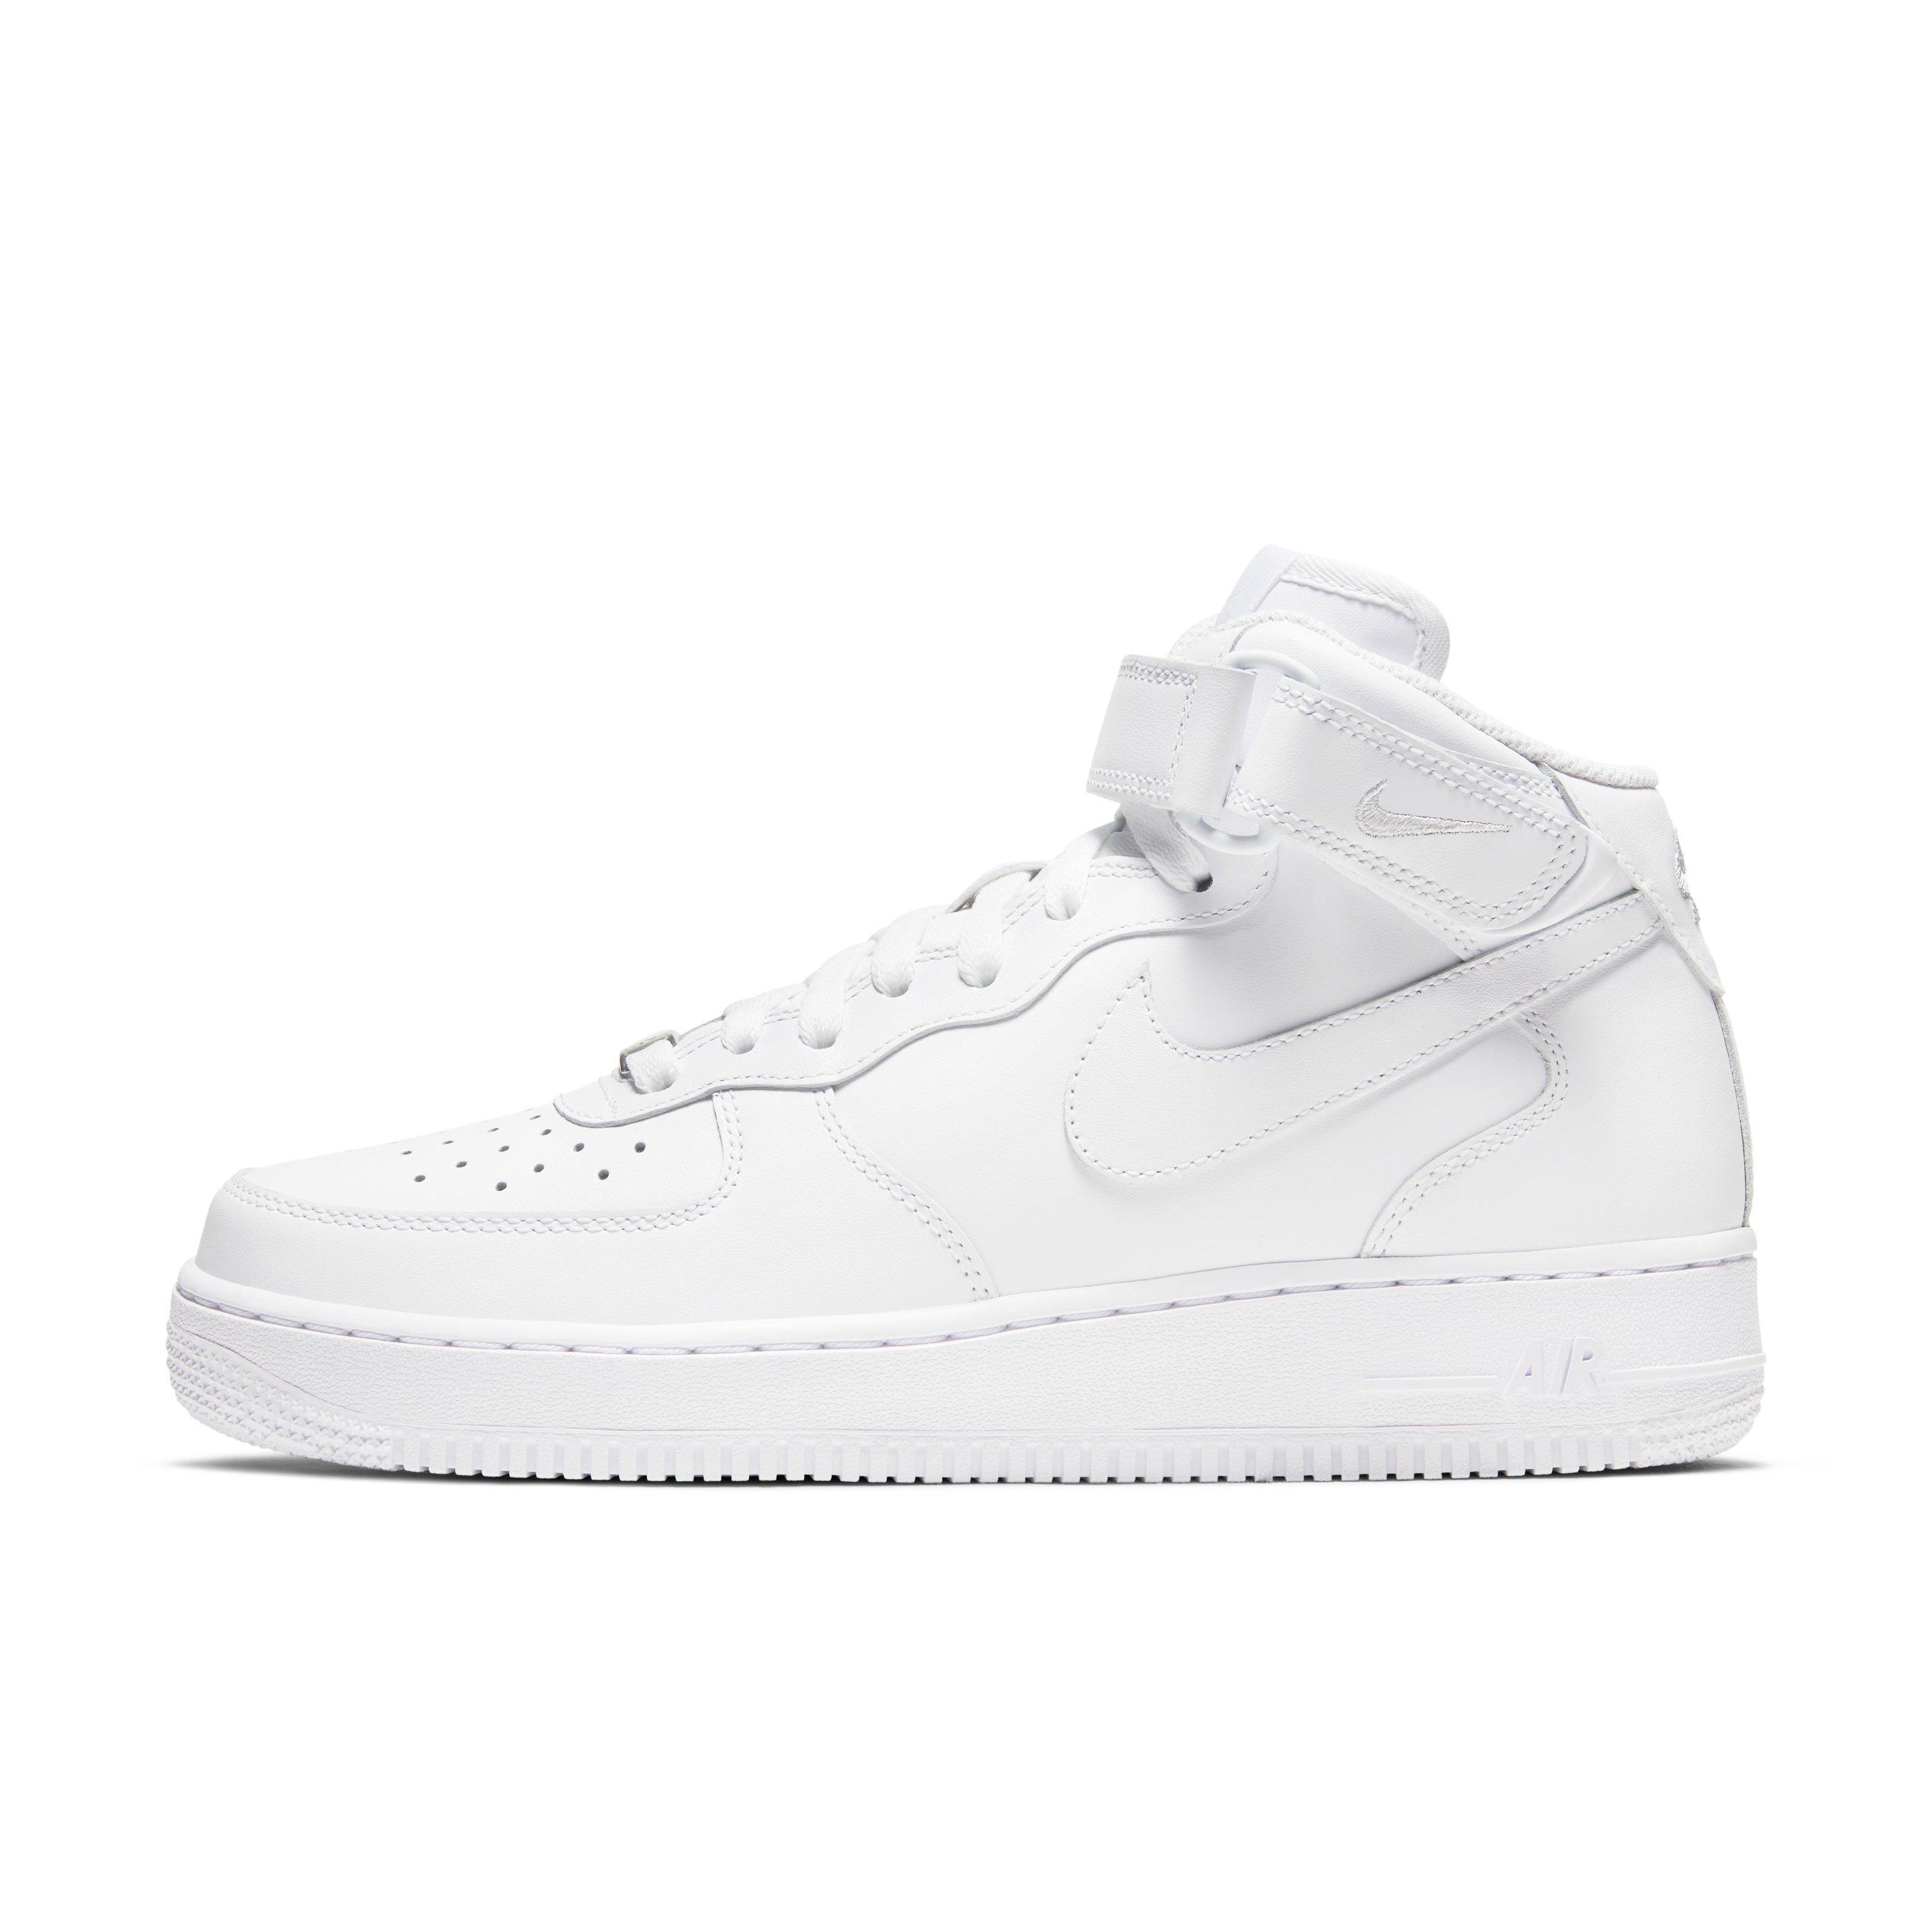 Nike Air Force 1 '07 Mid Women's Shoes